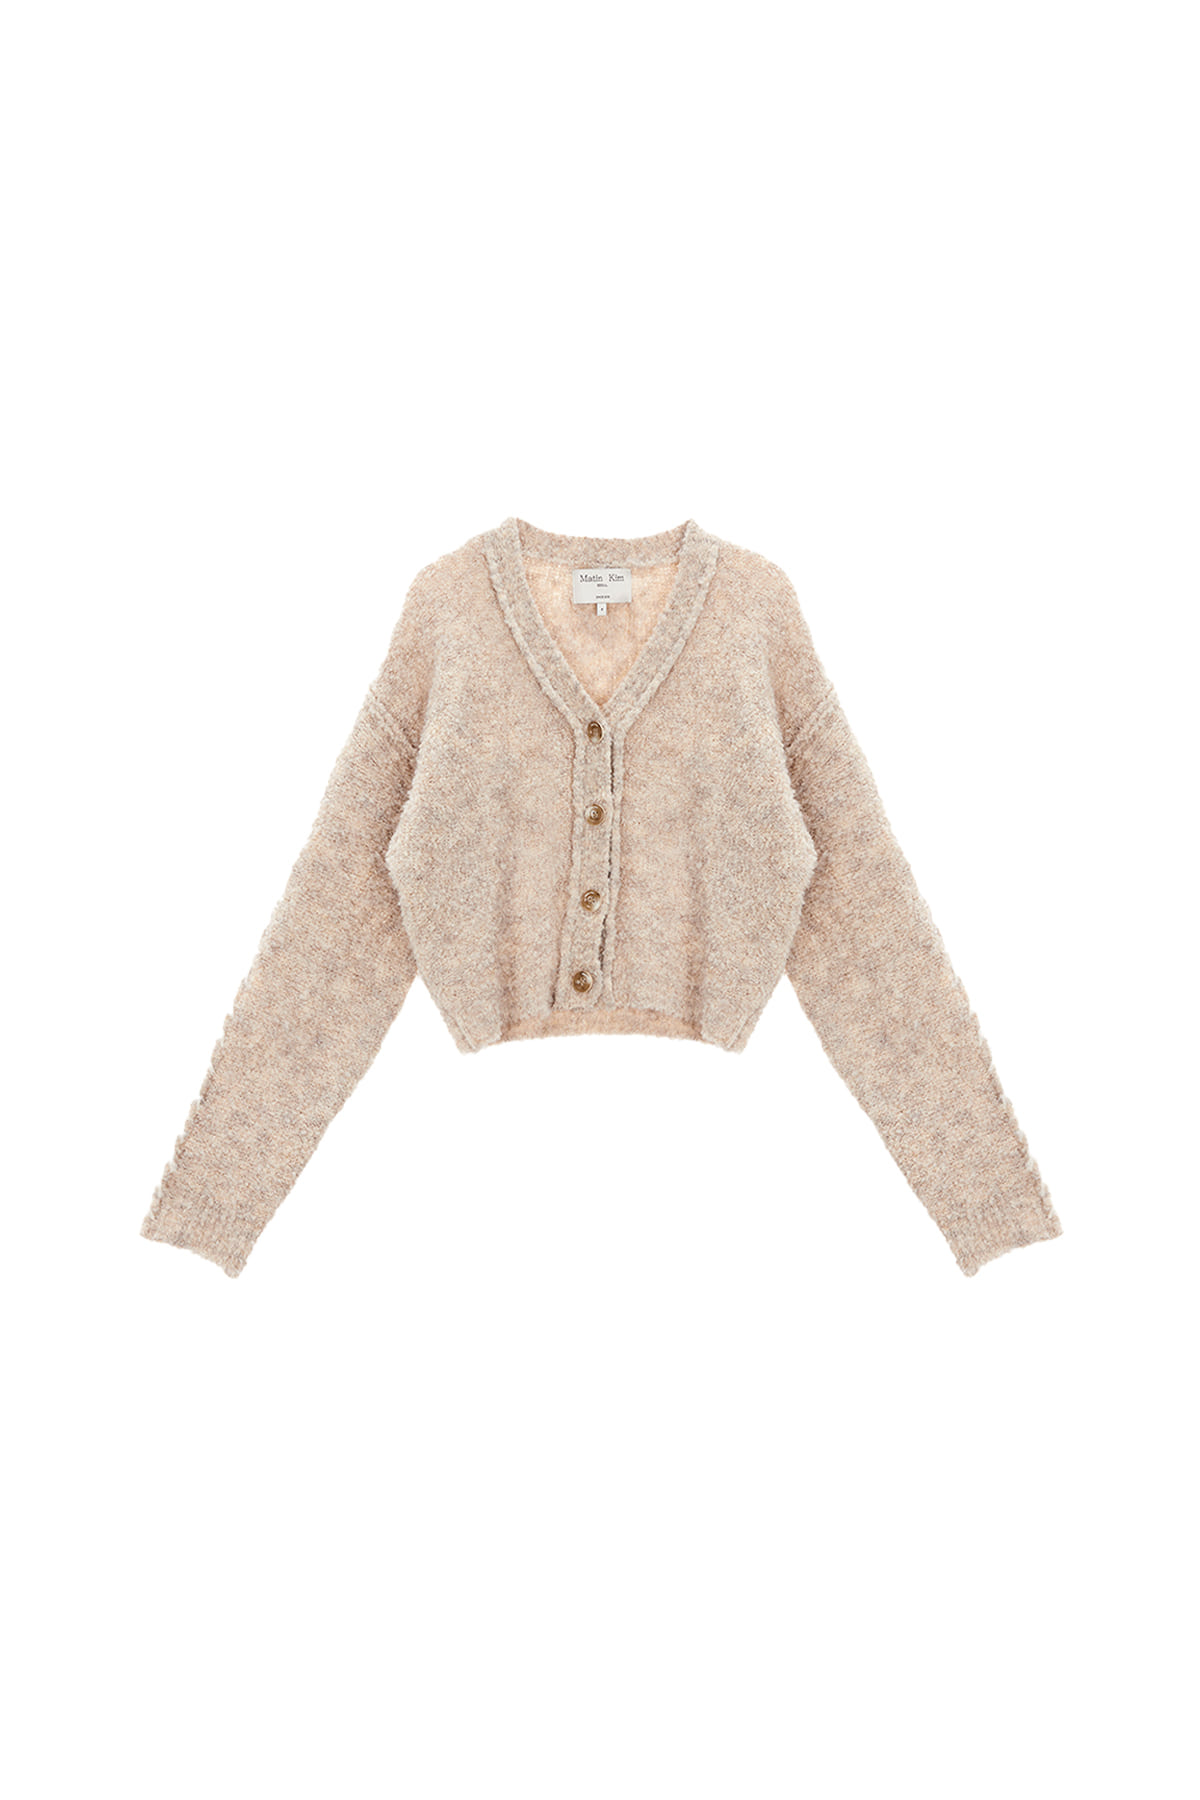 [EXCLUSIVE] SLEEVE STITCH CROP BOUCLE CARDIGAN IN BEIGE